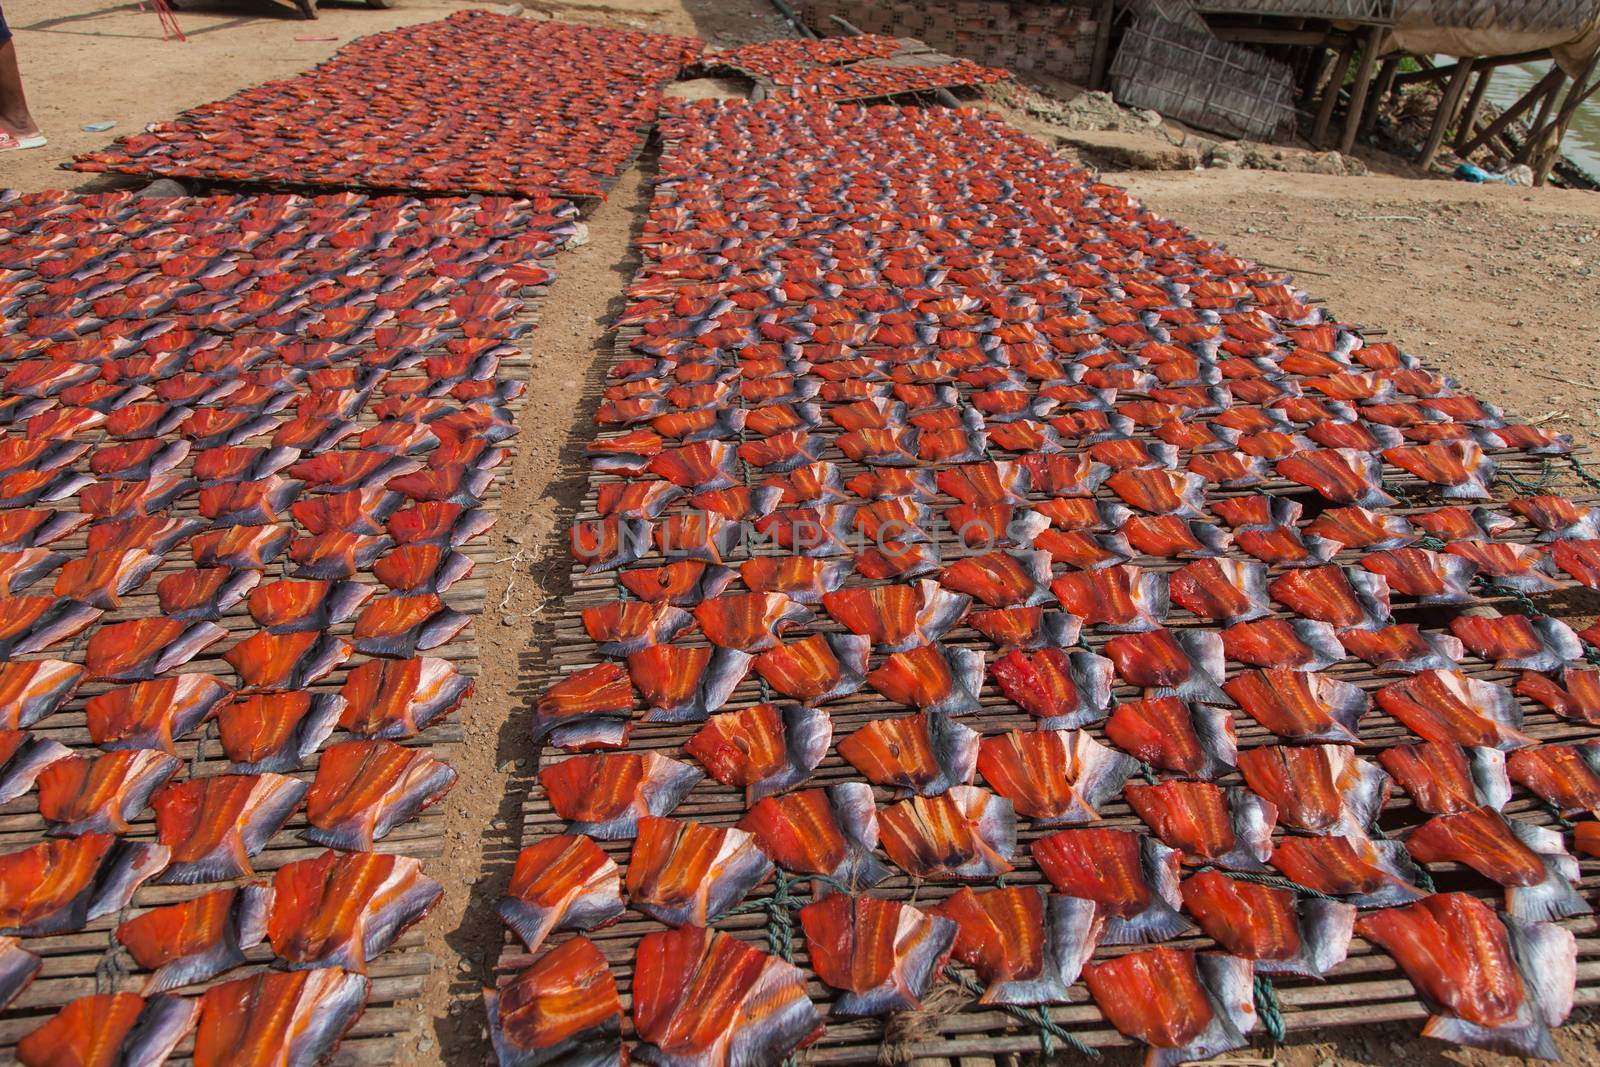 Fish drying in the sun at Phsar Prohok, The Fish Paste Market, Battambang where fish-paste is made, a staple condiment in Cambodia and Vietnam. The fish is gutted and cleaned and laid out in patterns of red and silver. High quality photo